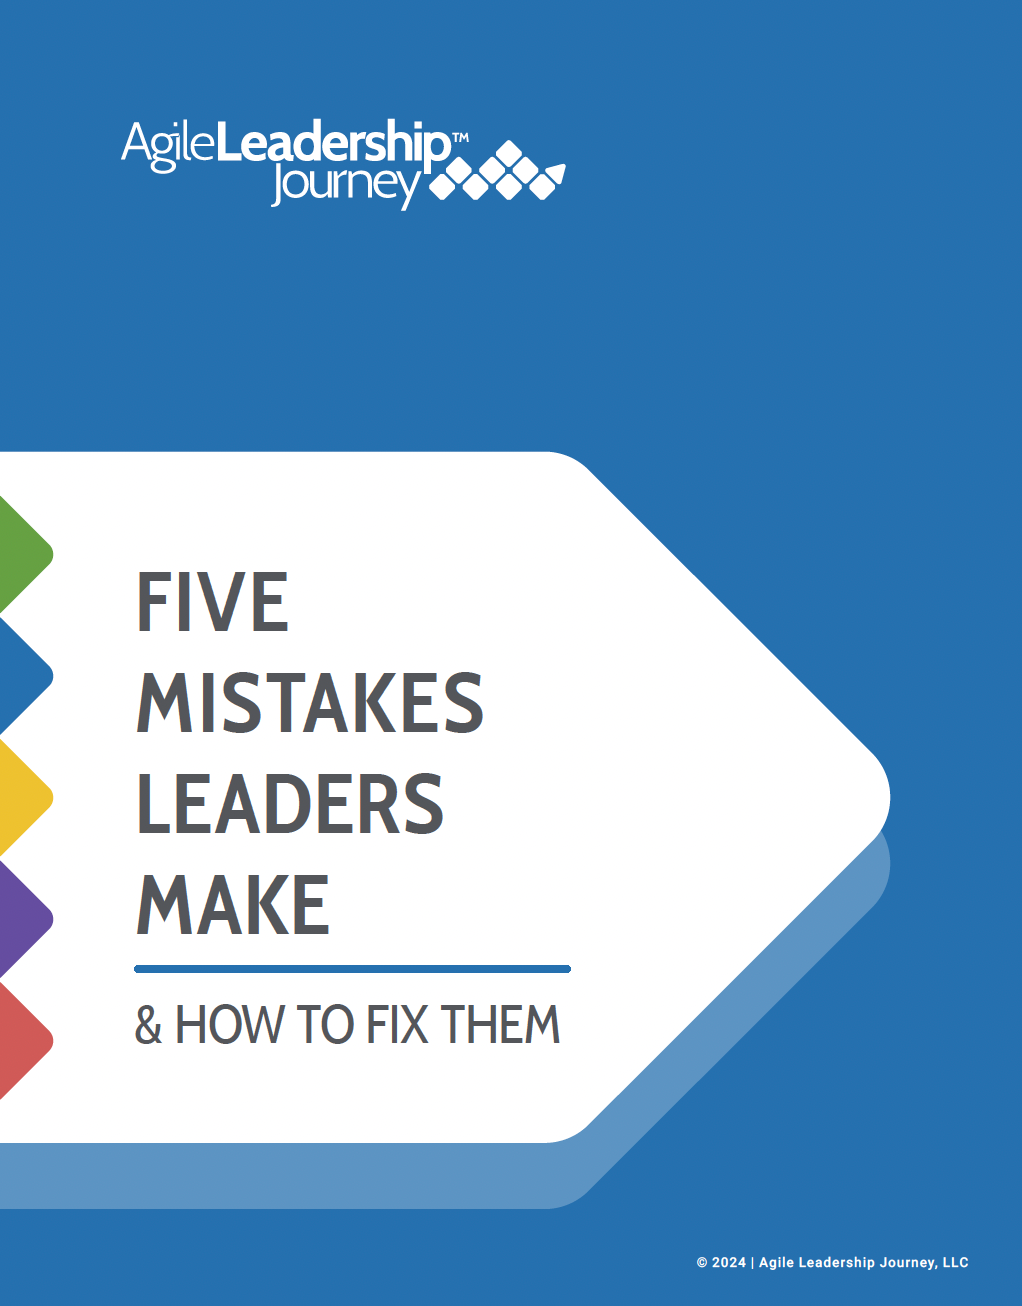 An image of the cover of the ALJ ebook 5 Mistakes Leaders Make and How to Fix Them